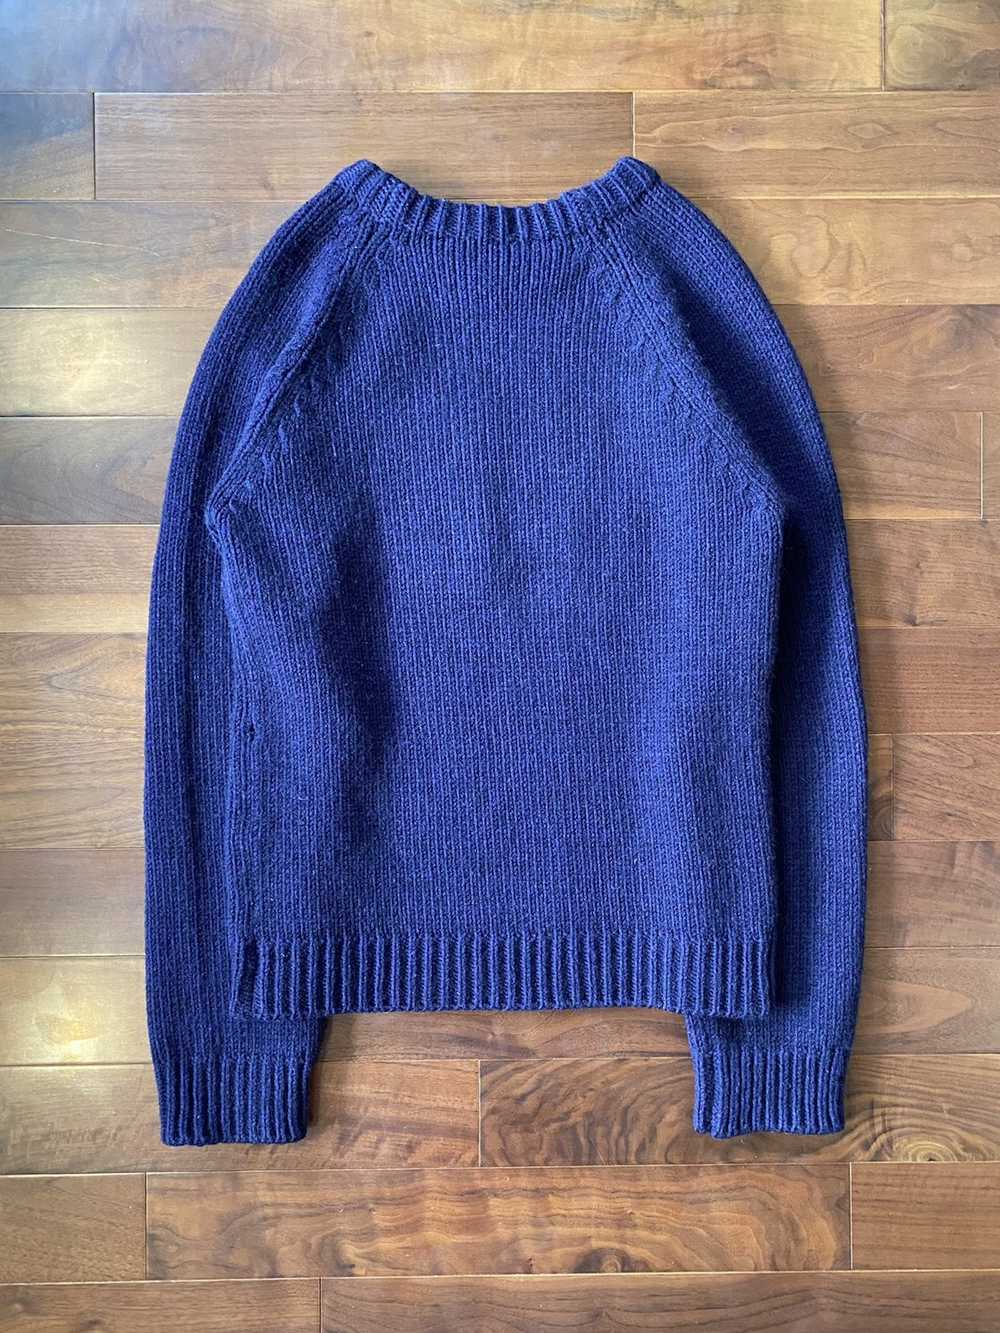 Raf Simons AW20 KNIT PATCH SWEATER - image 2